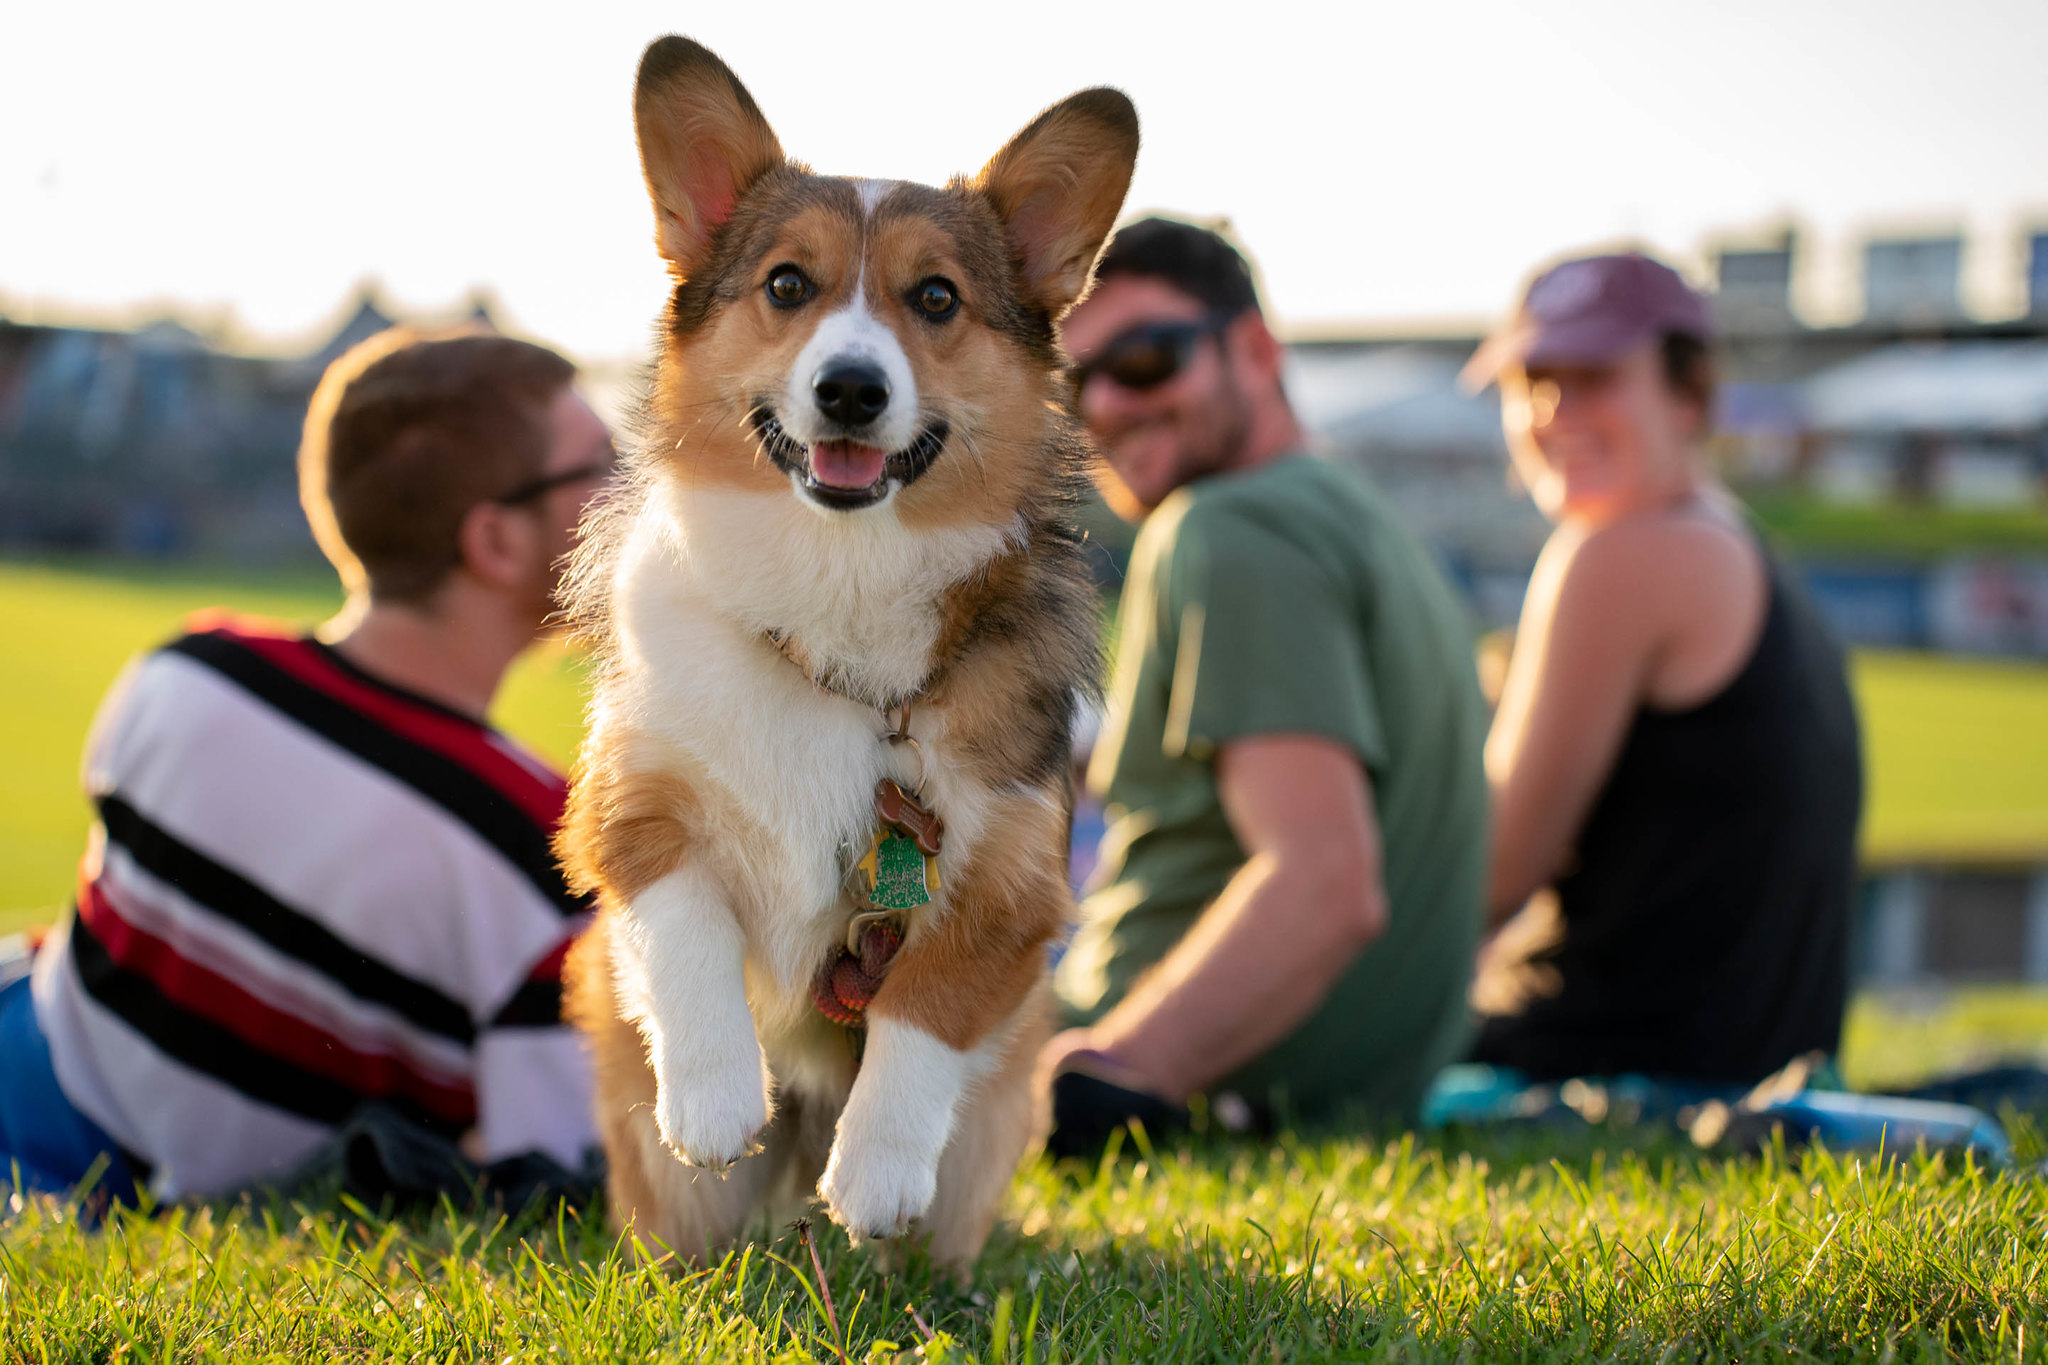 A corgi stands up on their hind legs while looking straight on to the camera. Behind them are three people sitting in the grass, looking back toward the dog and smiling.